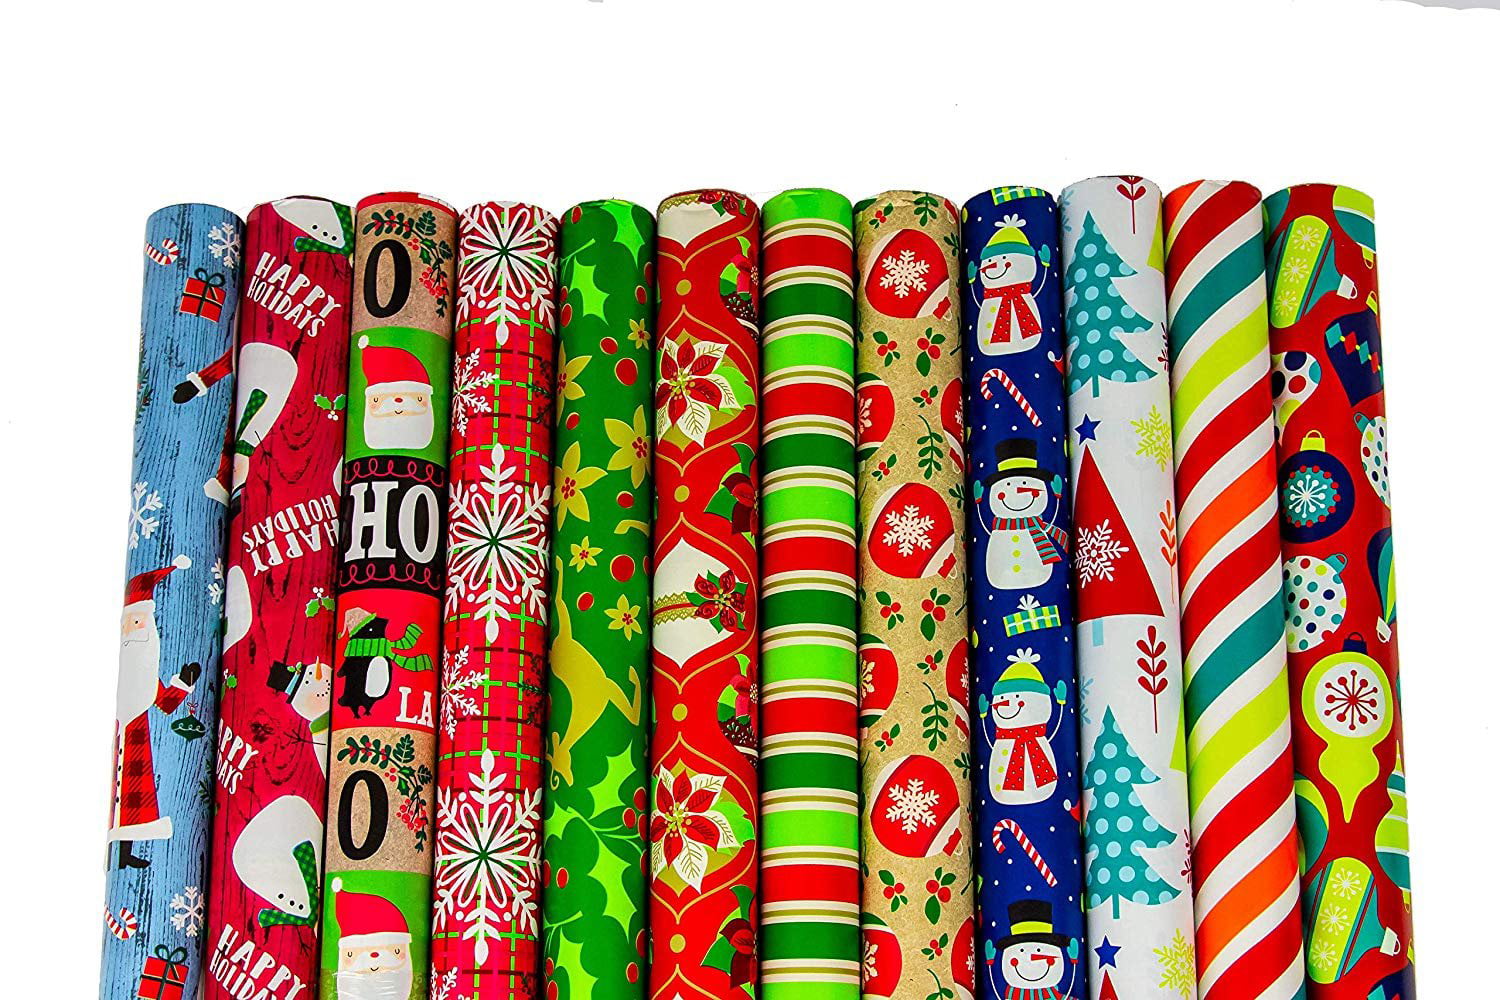 Bundle of 12 Rolls of Christmas Gift Wrapping Paper - 300 Total Sq Ft